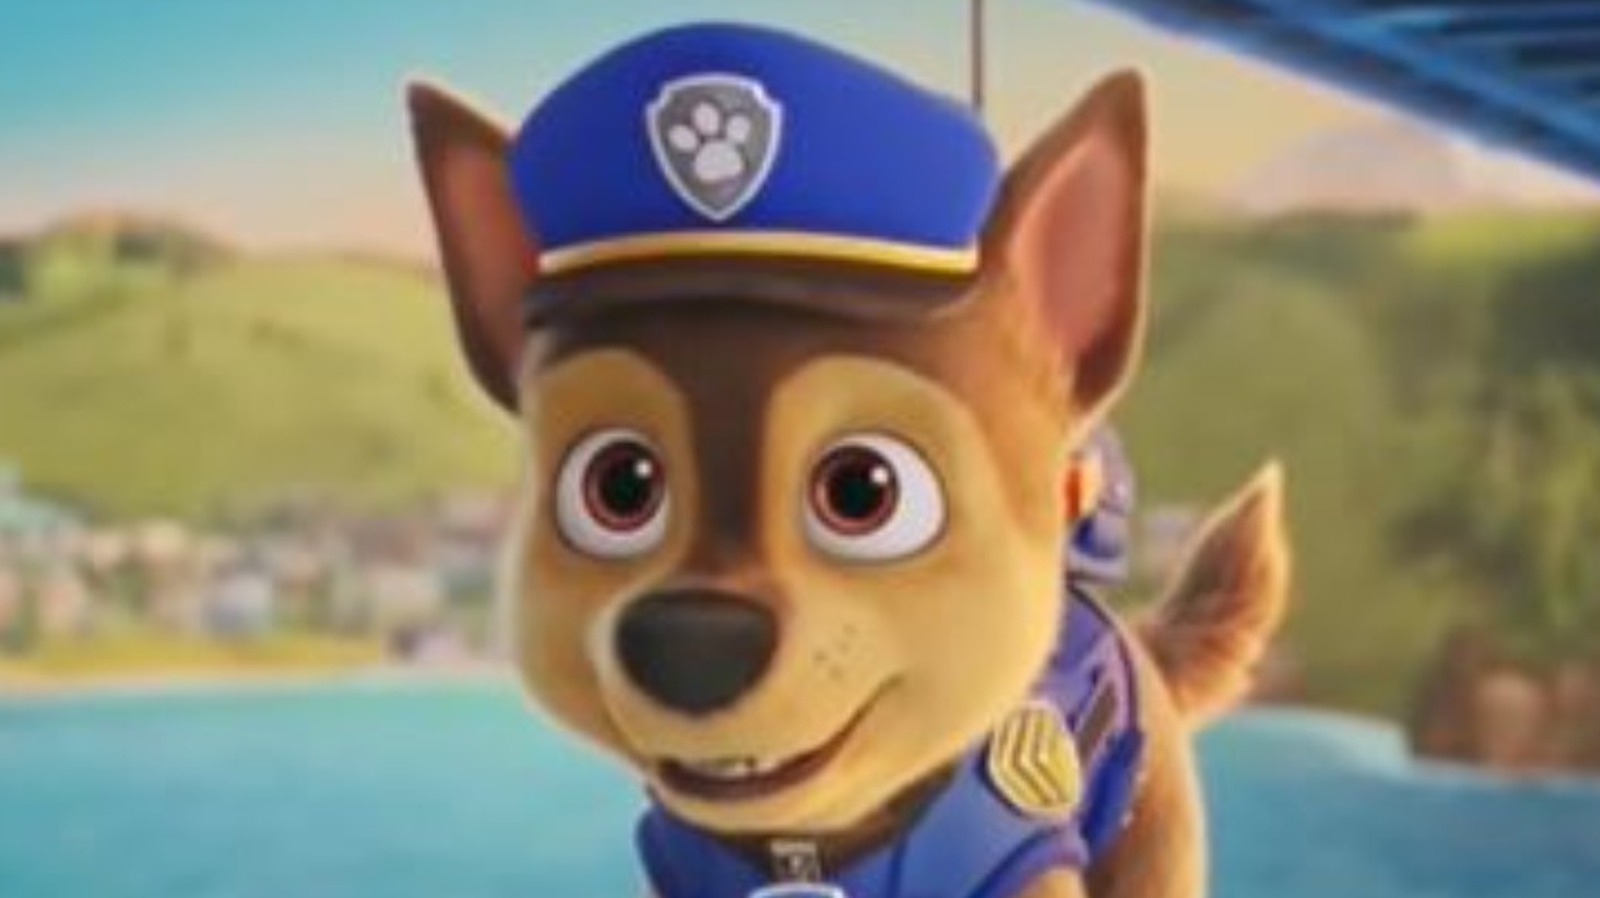 Chase Can't Sleep - PAW Patrol The Movie 2021 